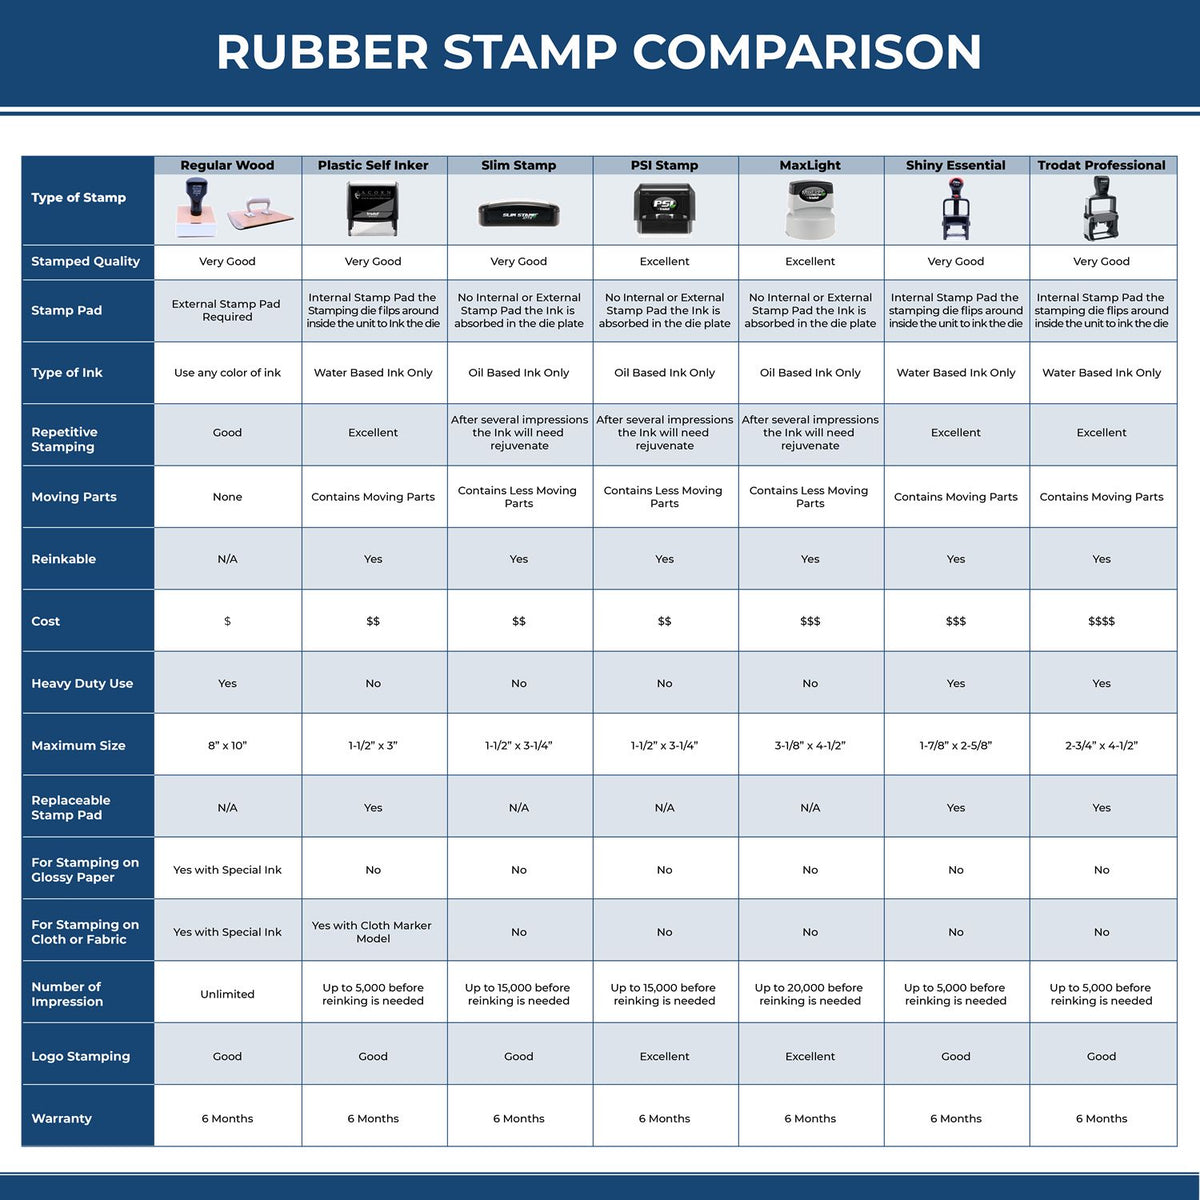 Large Pre-Inked Bold X-Rays Stamp 5590SLIM Rubber Stamp Comparison